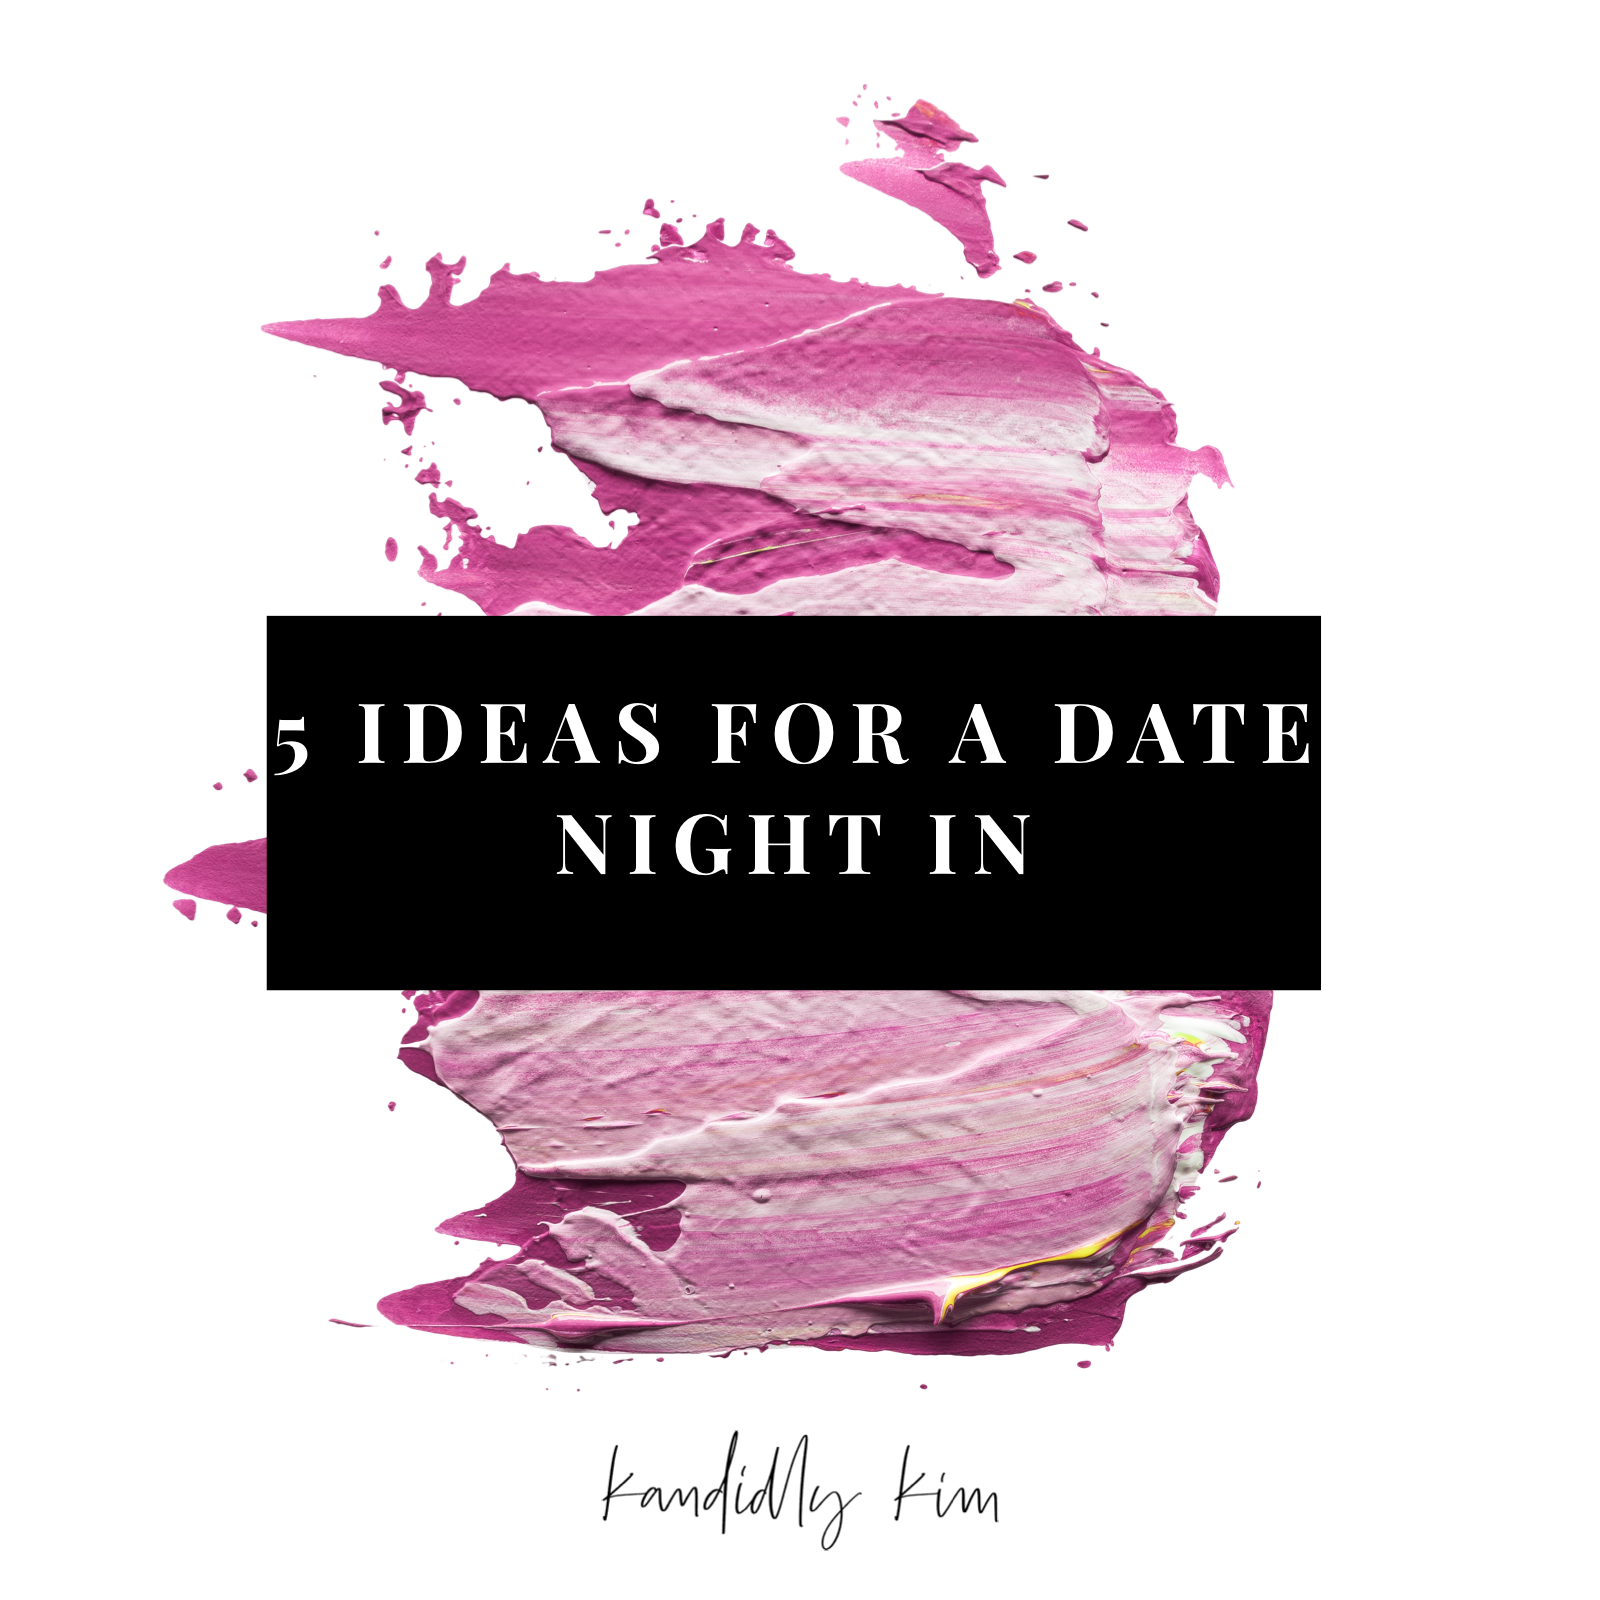 5 Ideas for a Date Night In! | Kandidly Kim